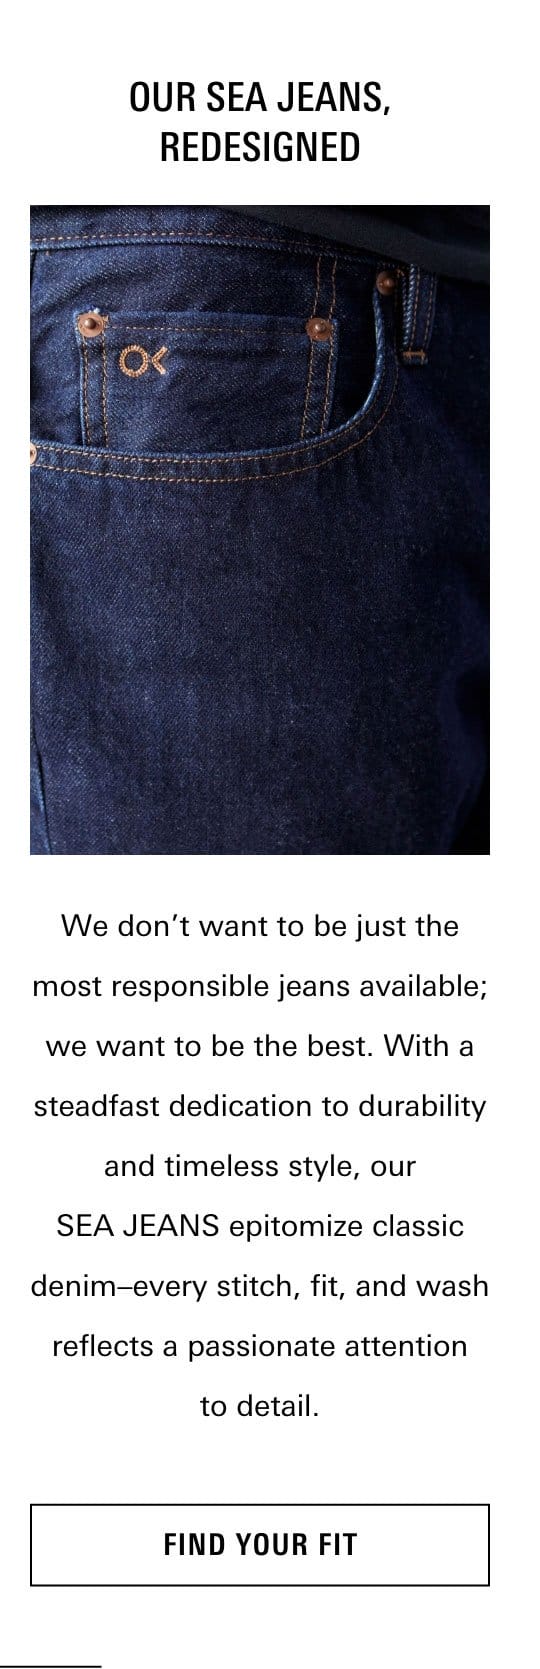 Our Sea Jeans Redesigned